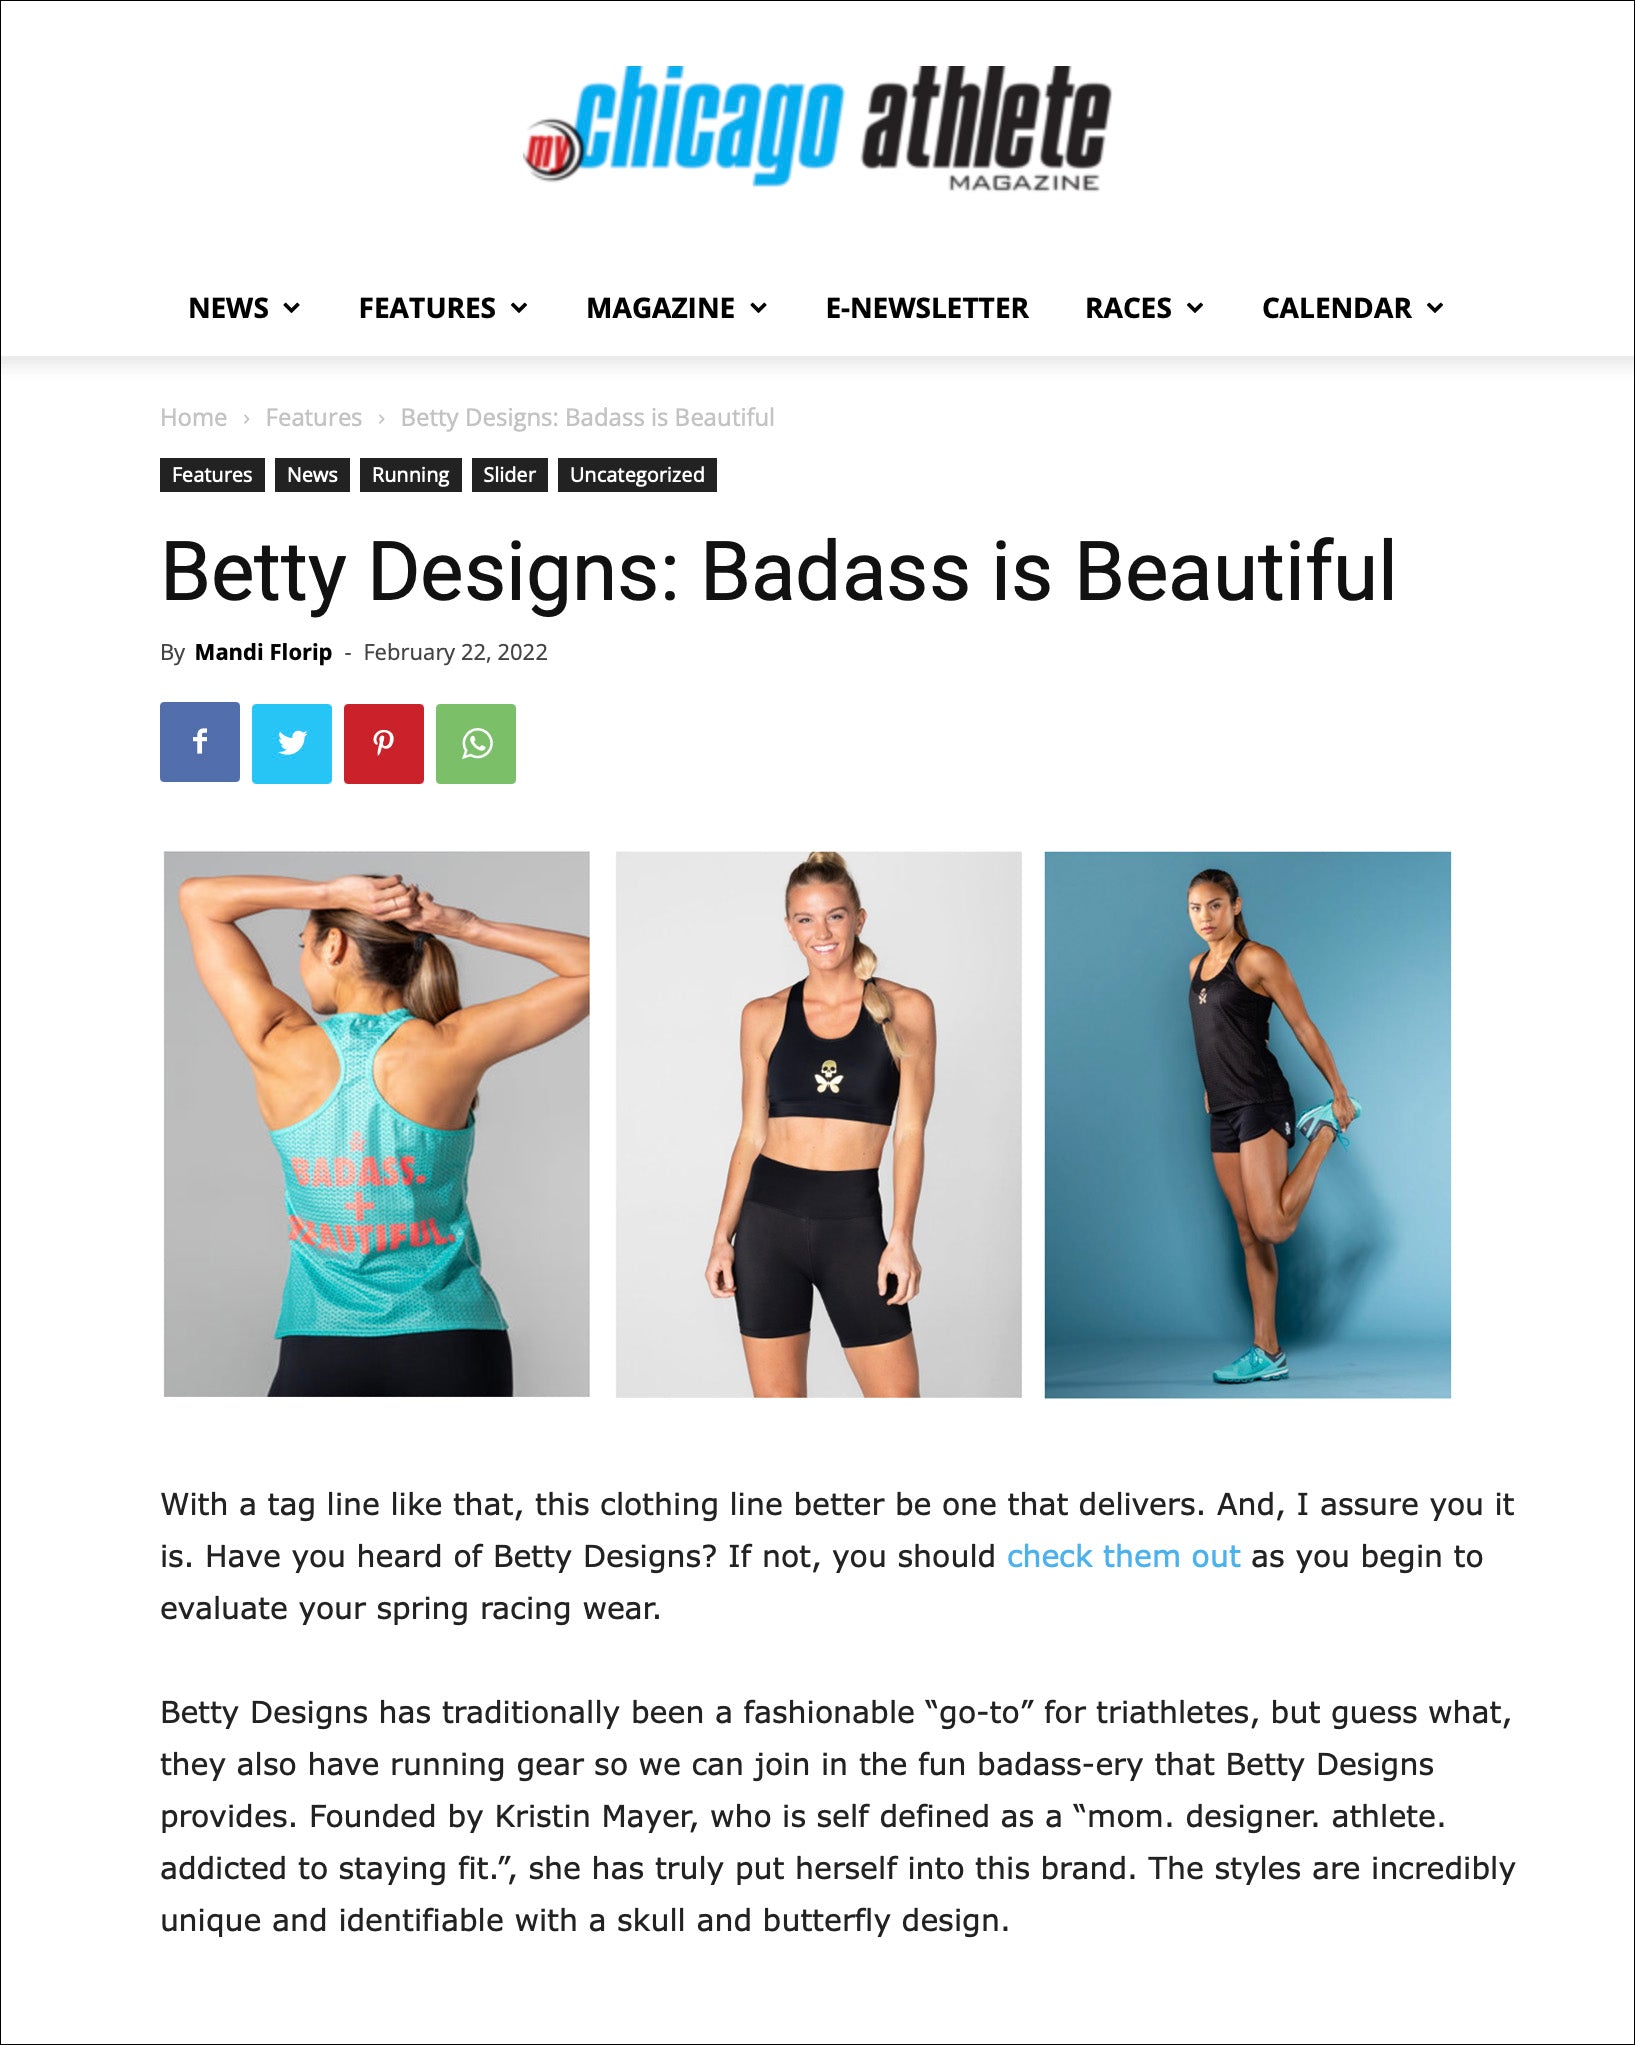 BETTY DESIGNS LUXE RUN APPAREL REVIEW BY CHICAGO ATHLETE MAGAZINE